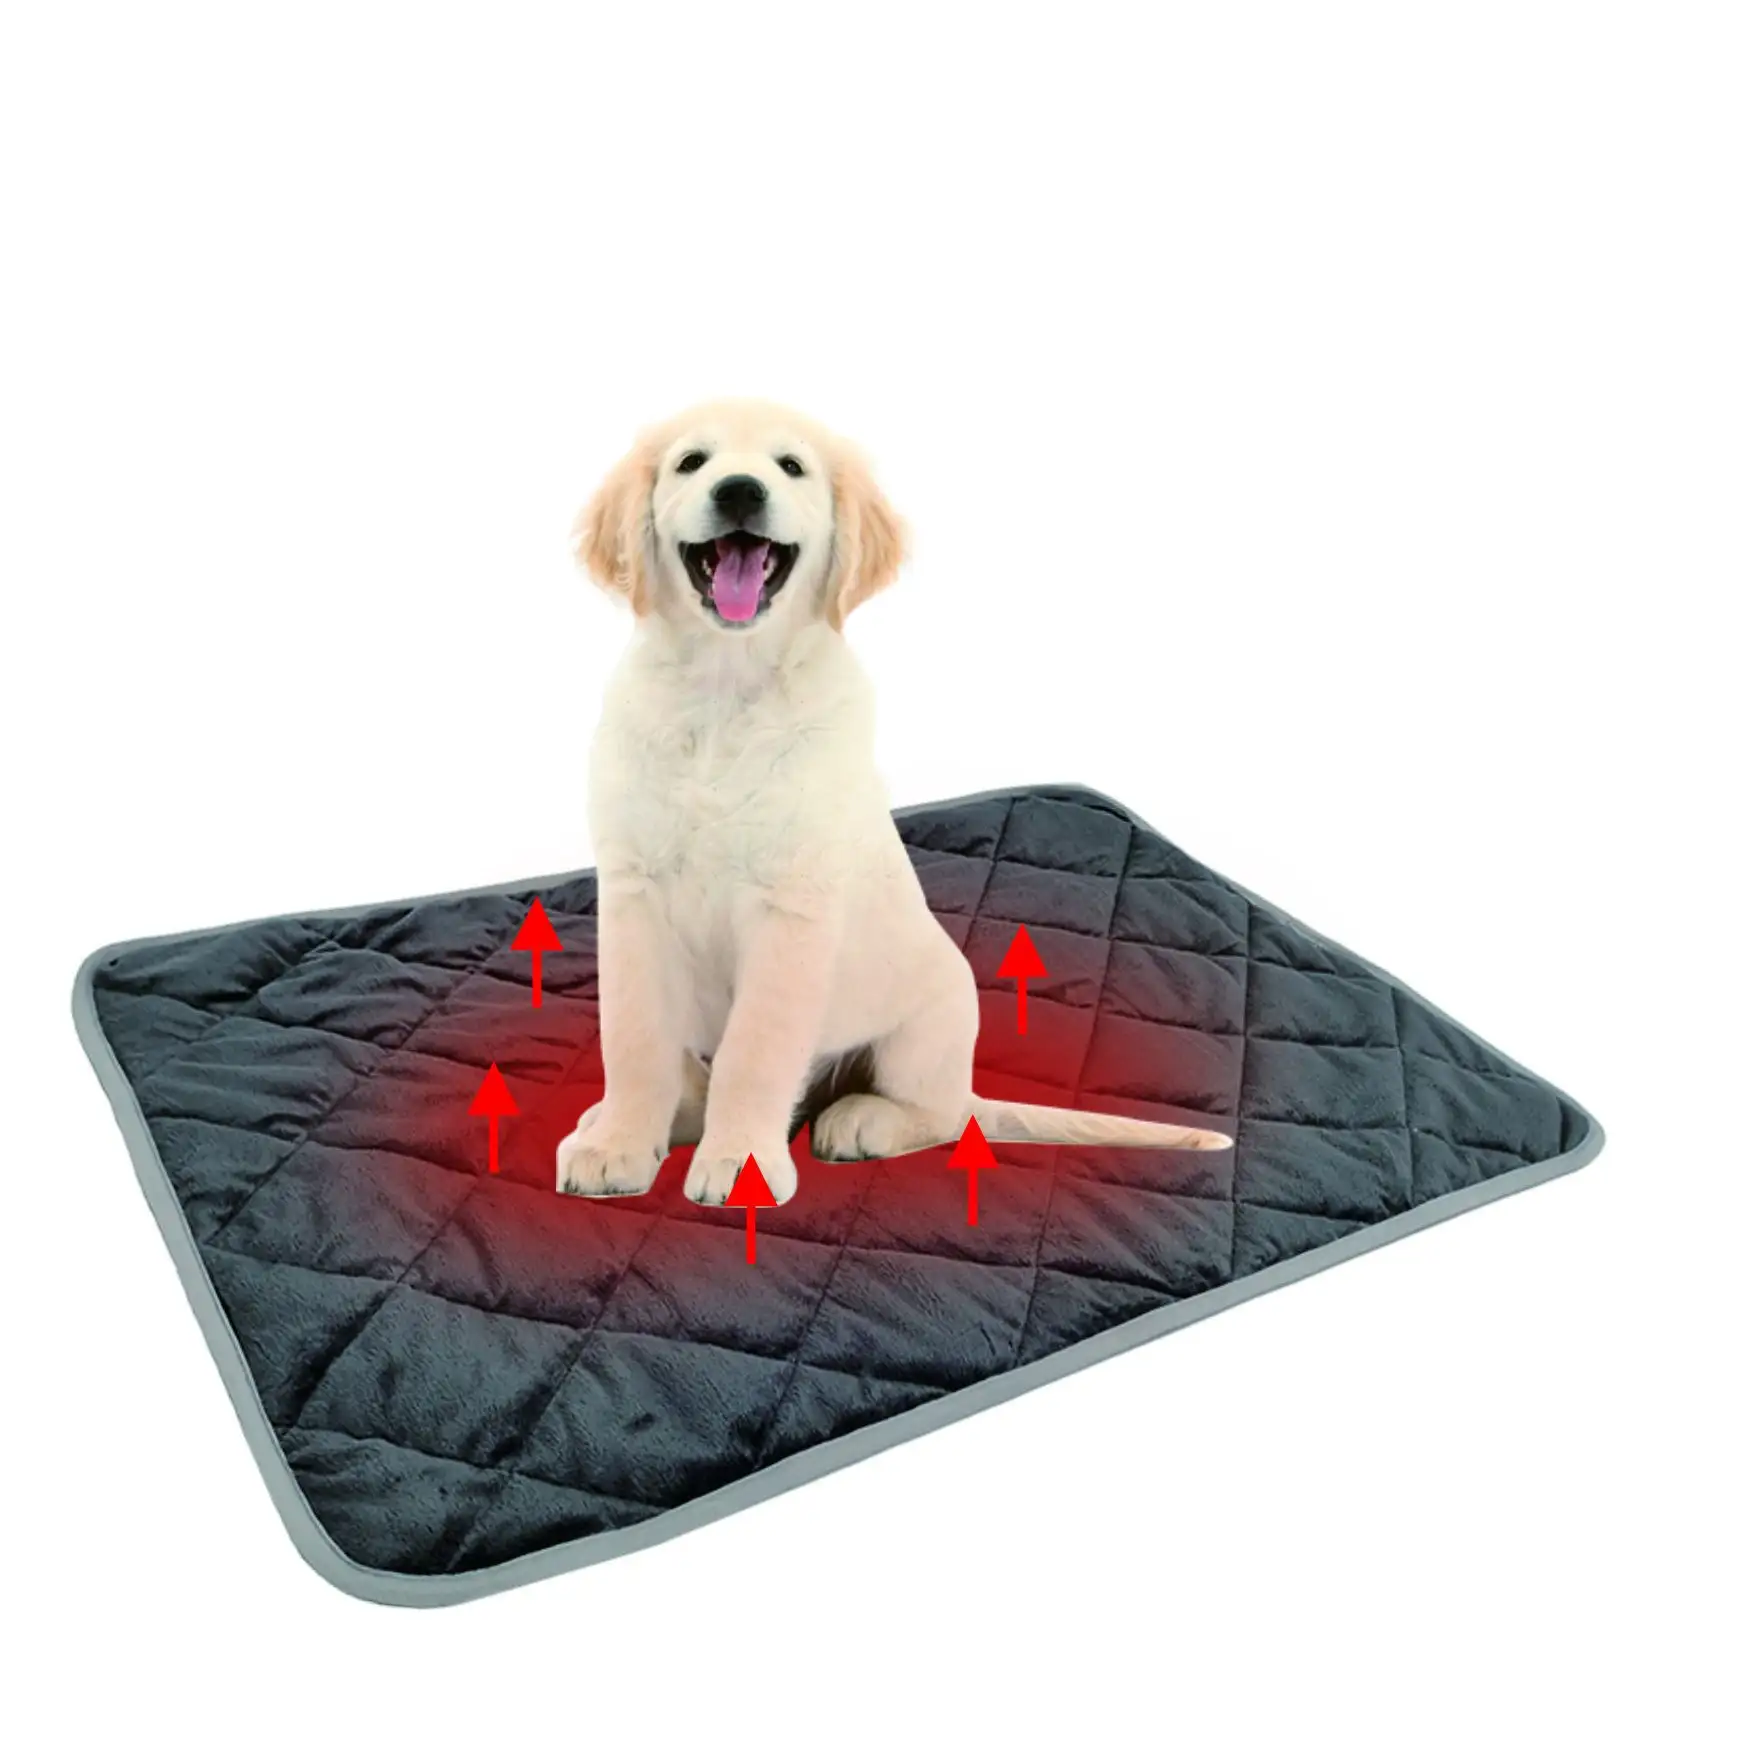 Drop shipping Dog Self Heating Pad Pet Warming Cushion Bed for Medium Large Dogs and Cats Reflects Pets Own Thermal